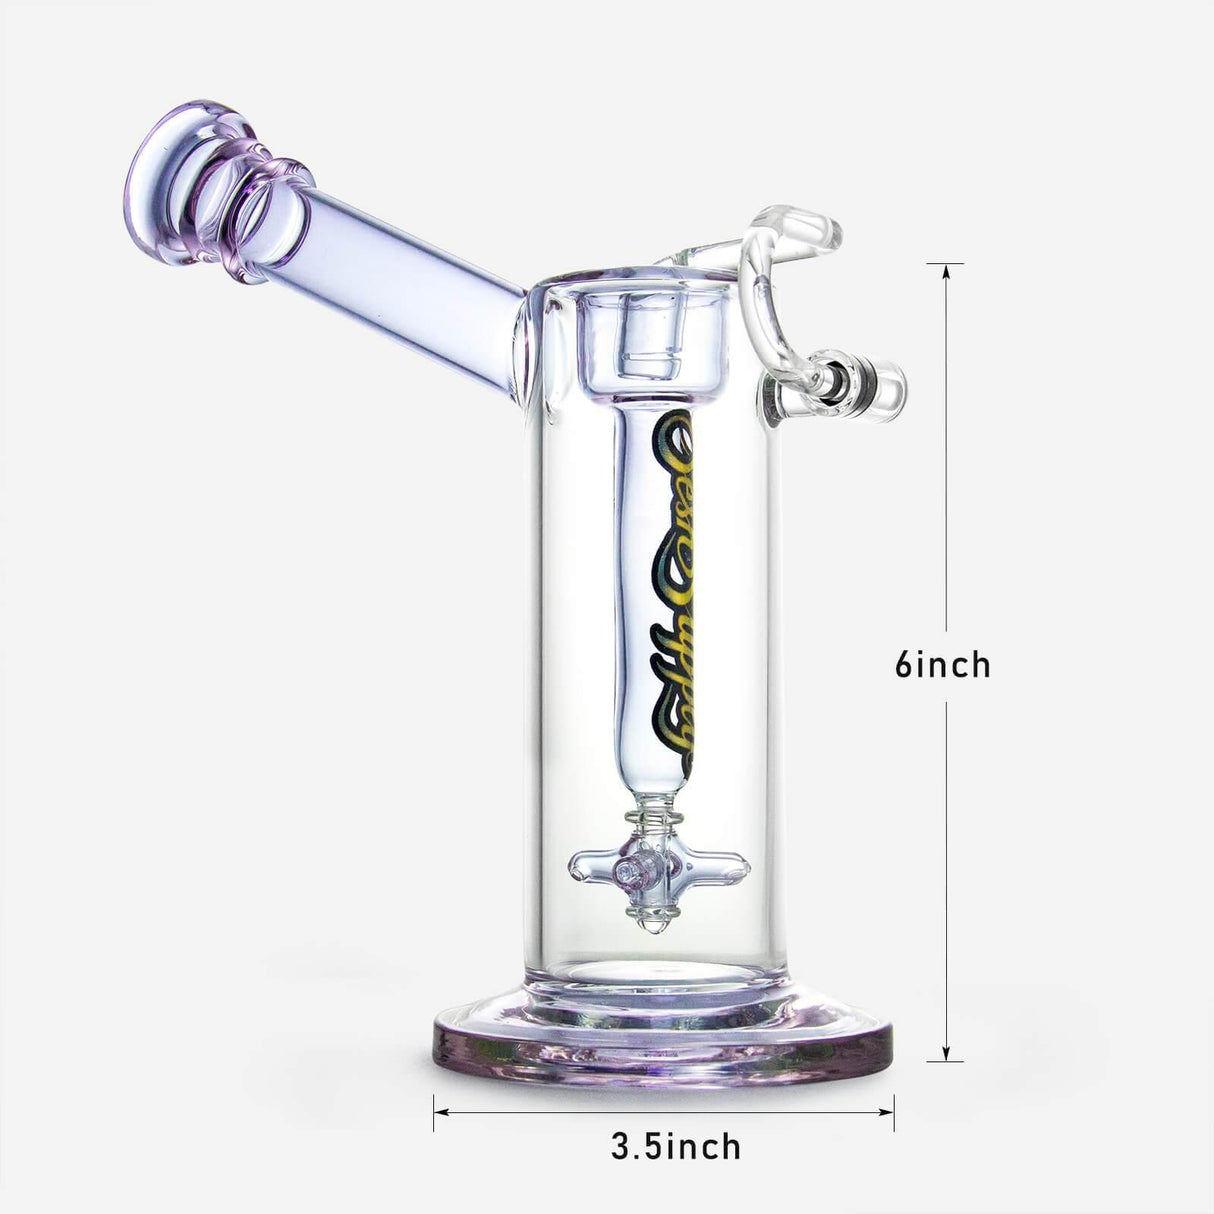 PILOT DIARY Hephaestus Swing Arm Dab Rig Front View with Dimensions